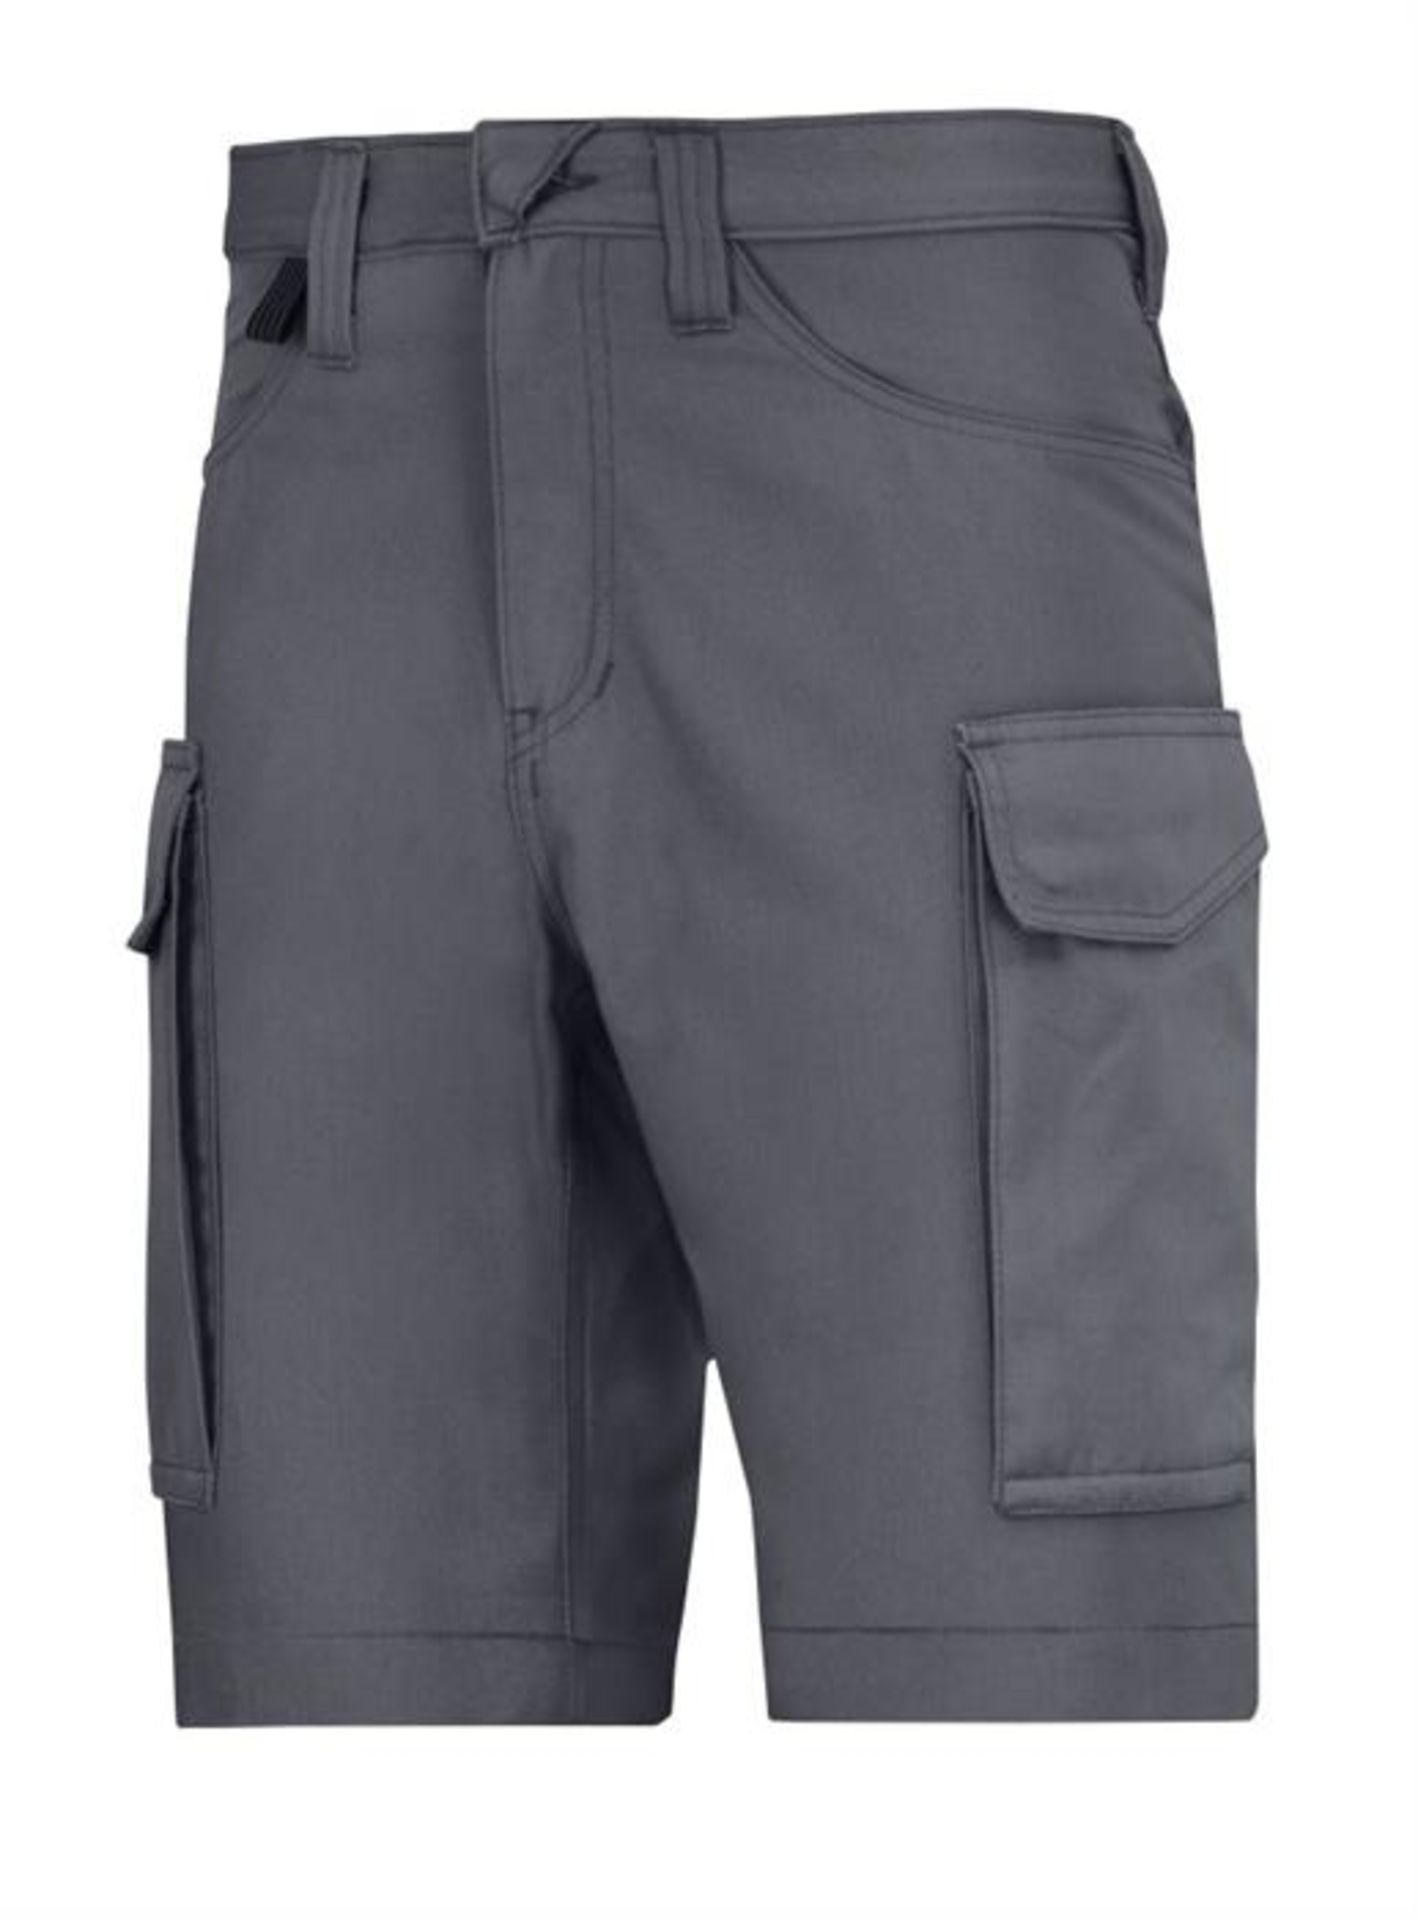 Snickers Grey Service Shorts - L